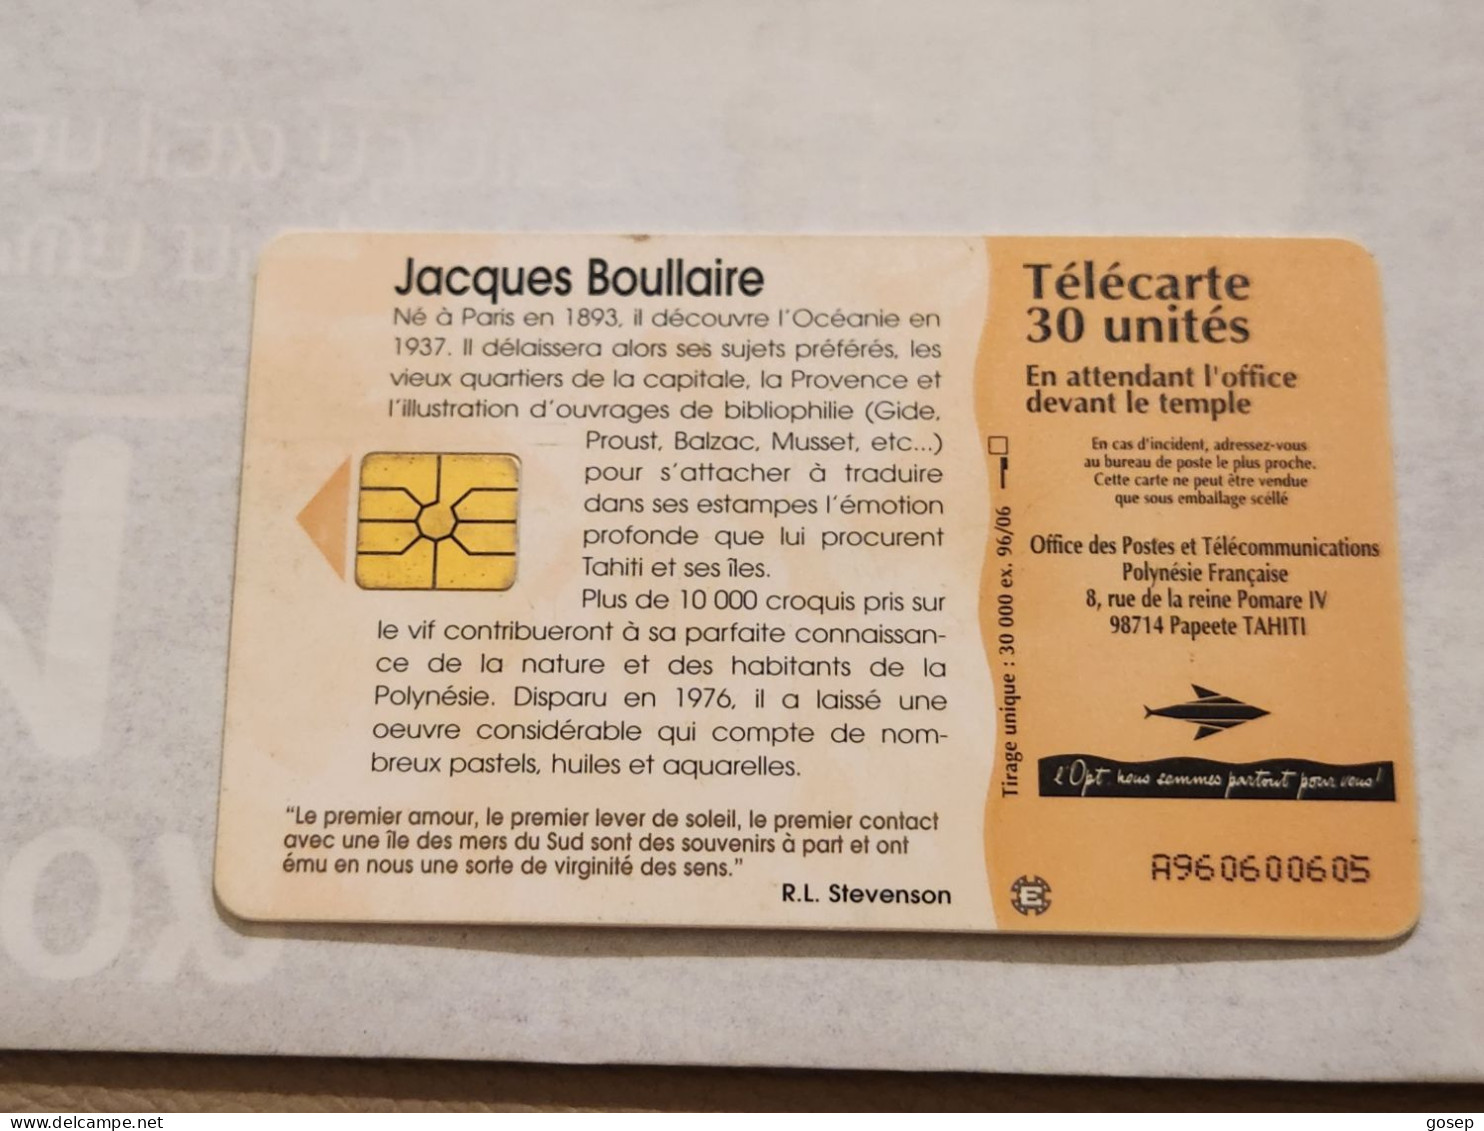 Polynesia-(FP-044)-En Attendant L'office-(24)-(A960600605)-(30units)-(tirage-30.000)-used Card - French Polynesia